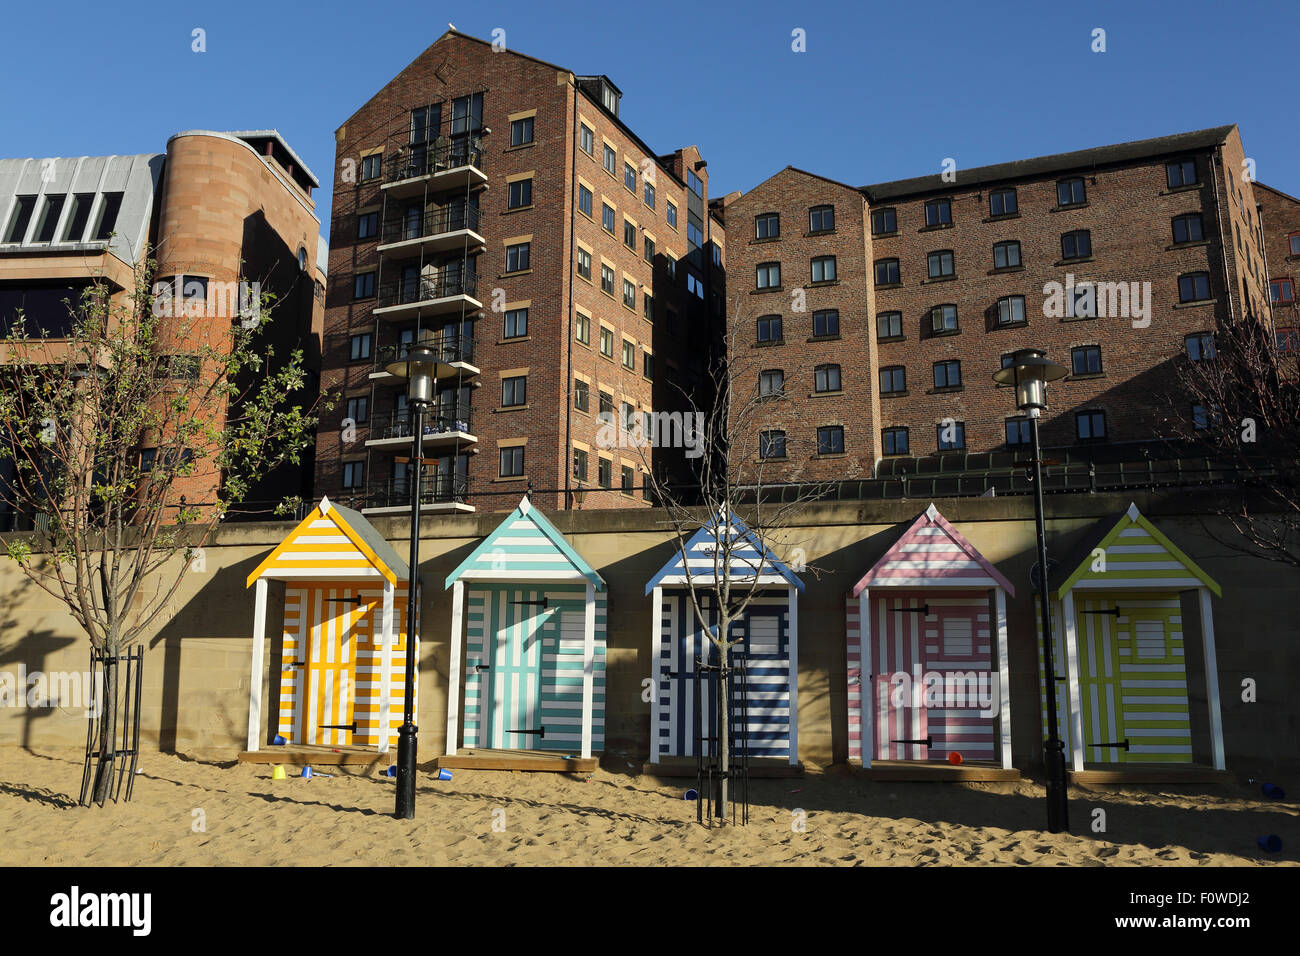 The Quayside Seaside in Newcastle-upon-Tyne, England. The area is a man-made beach. Stock Photo